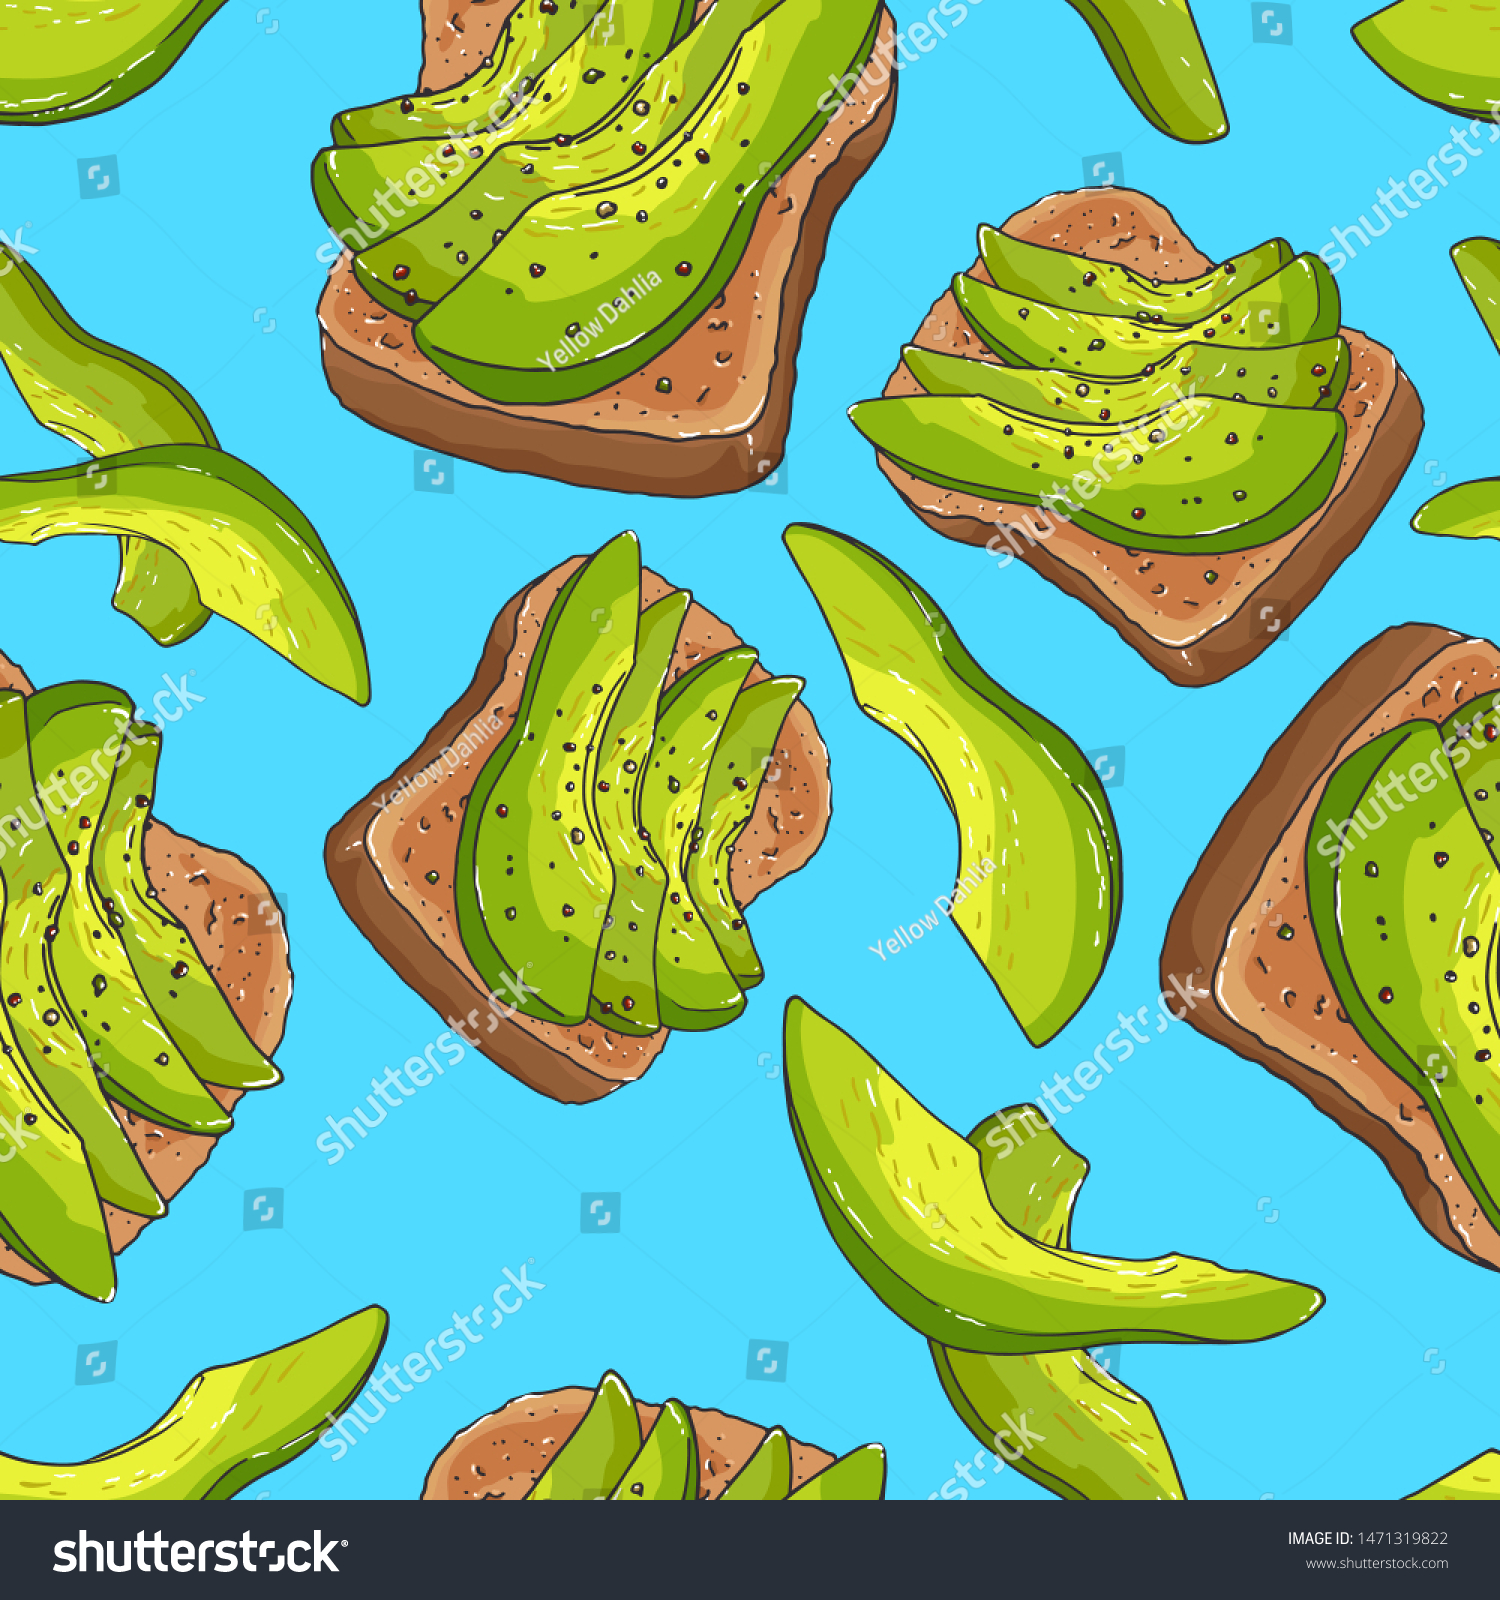 SVG of Avocado toast for breakfast. Healthy food. Ripe sliced avocado and whole grain bread. Seamless background with pattern svg